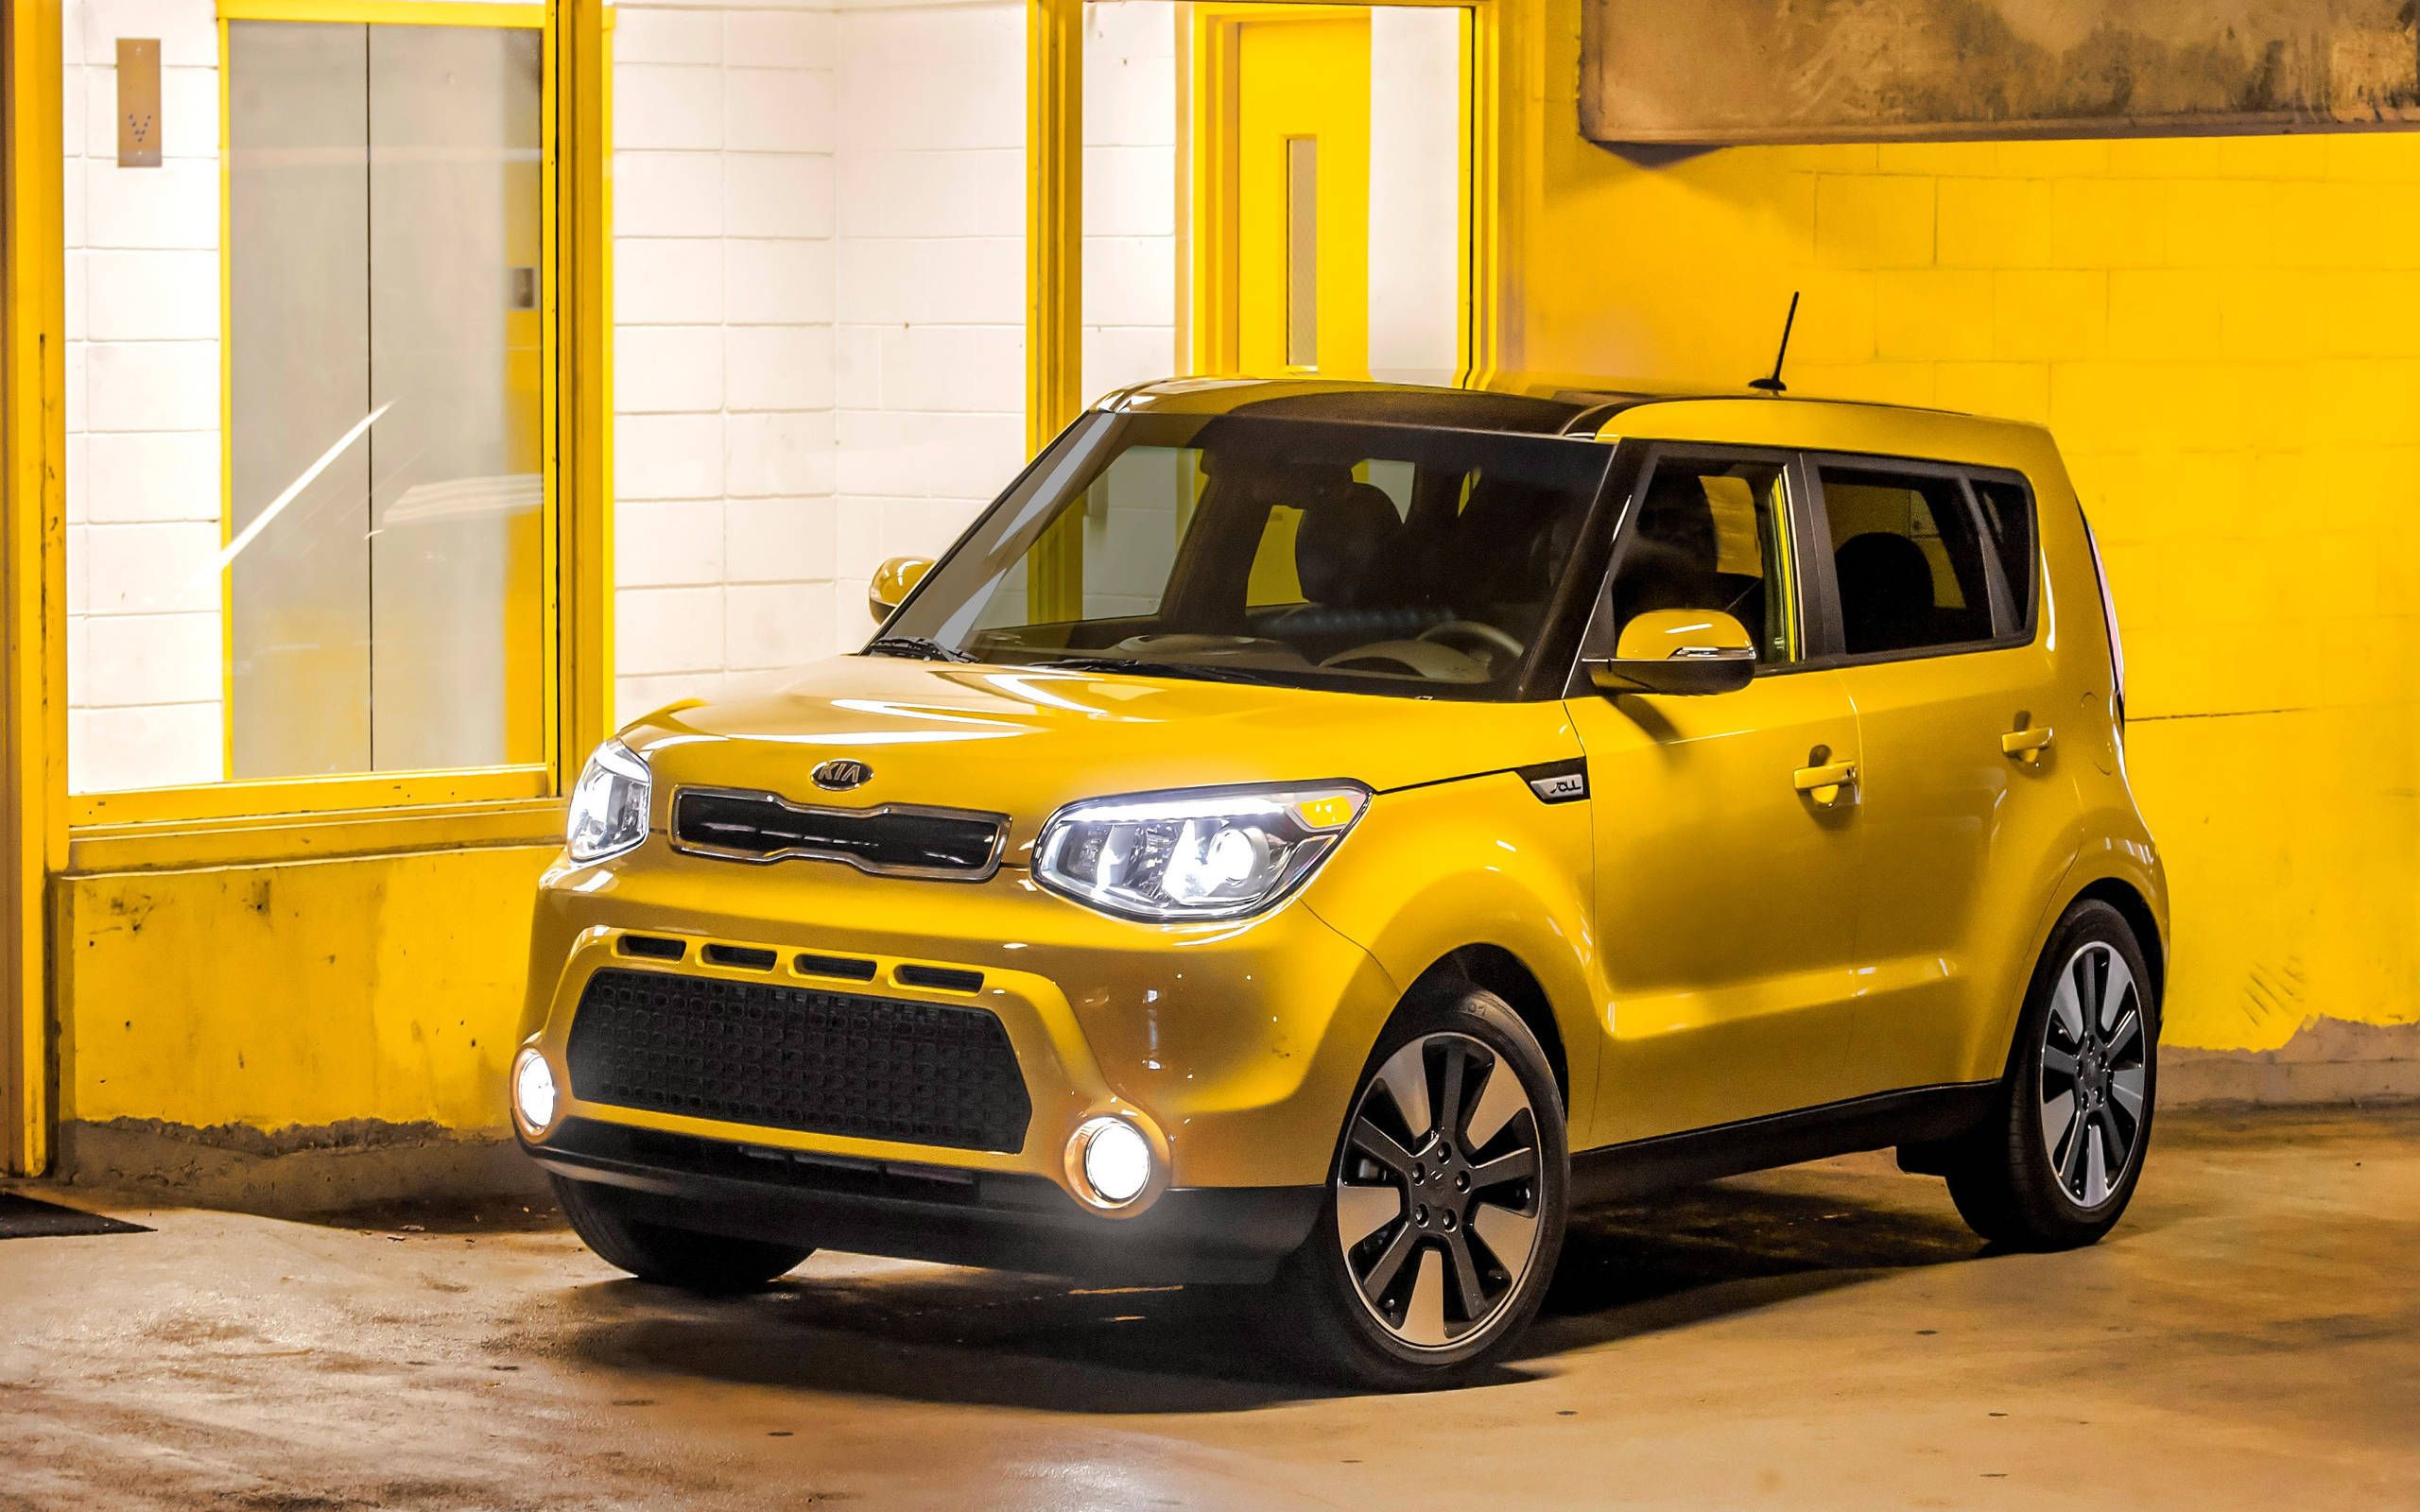 Kia Soul updated for 2015